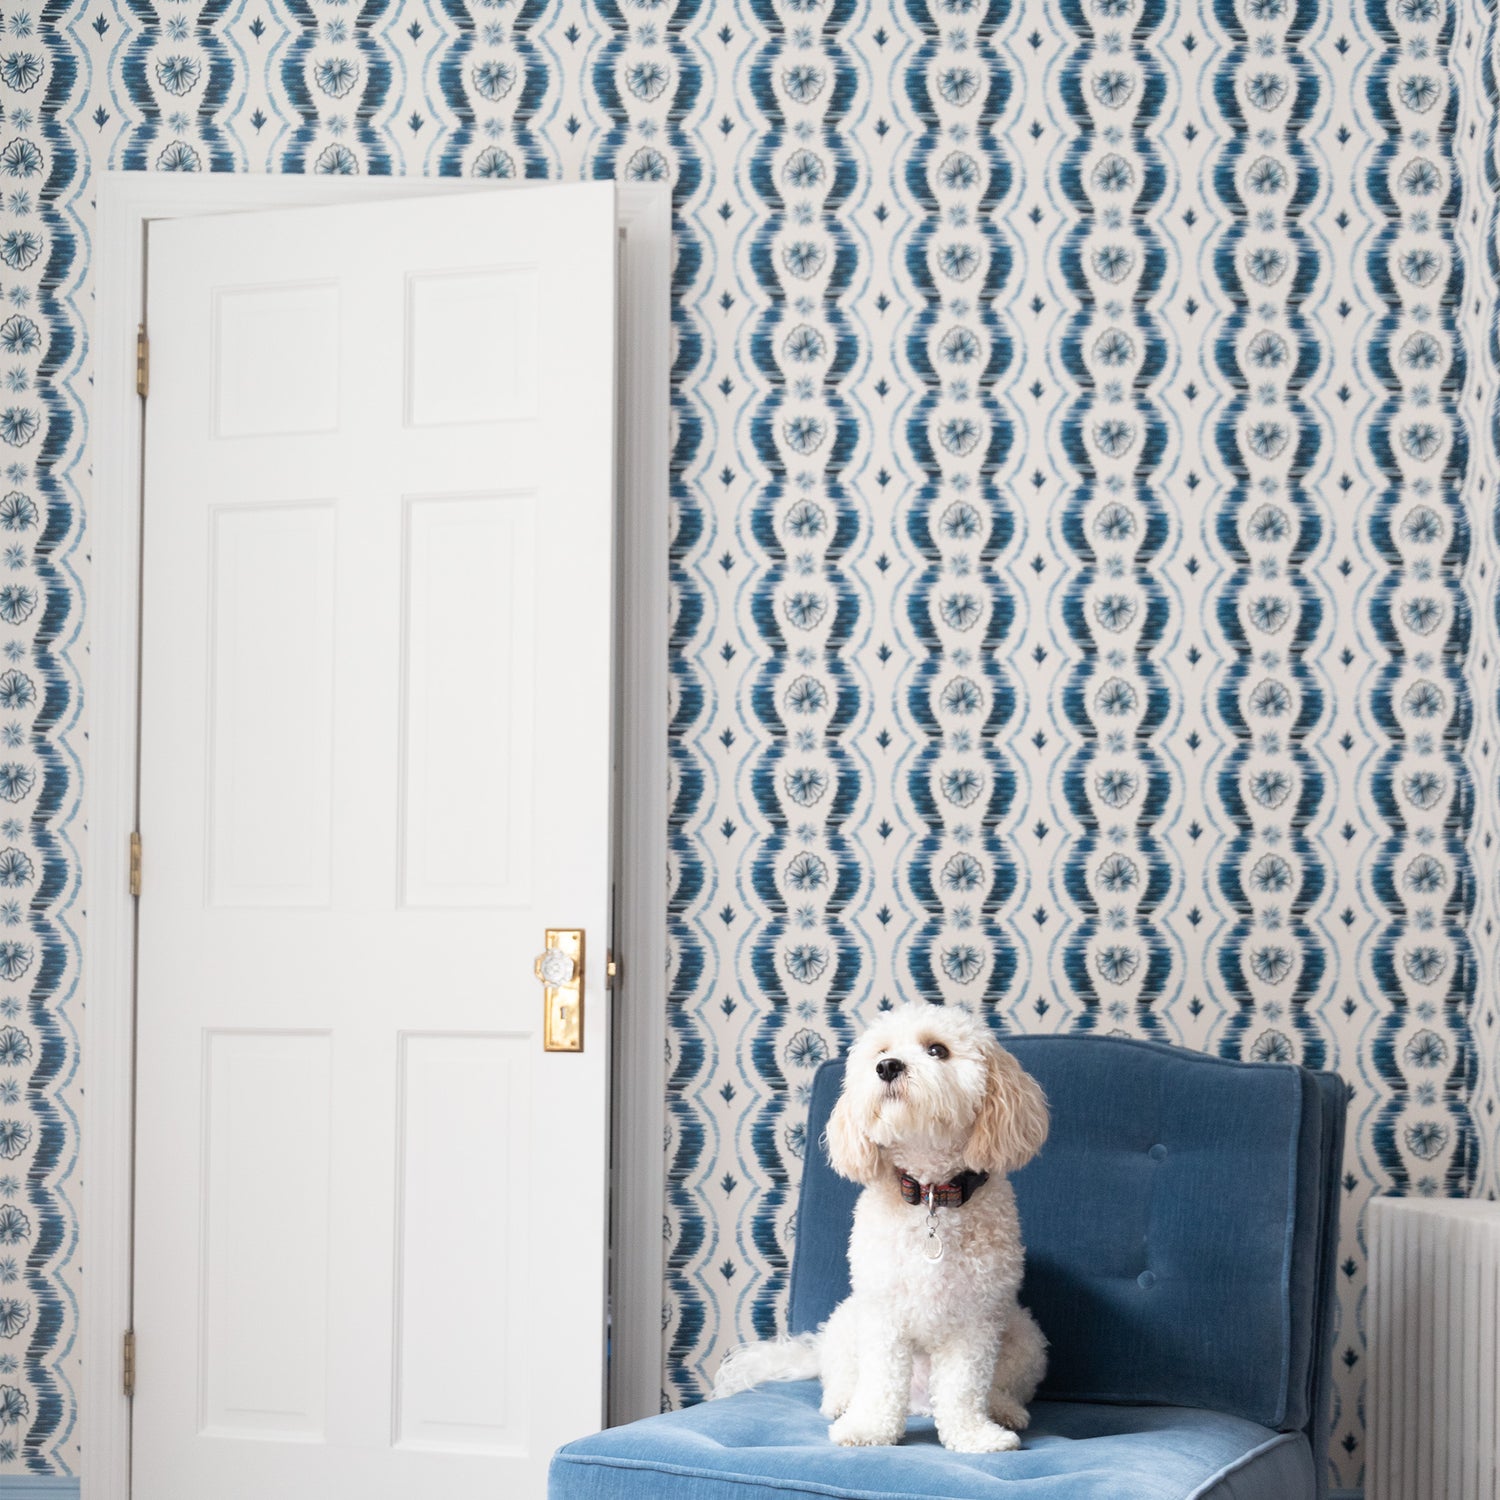 Blue Ikat Striped Pattern Wallpaper in room with white door besides a blue sofa chair and white dog on top